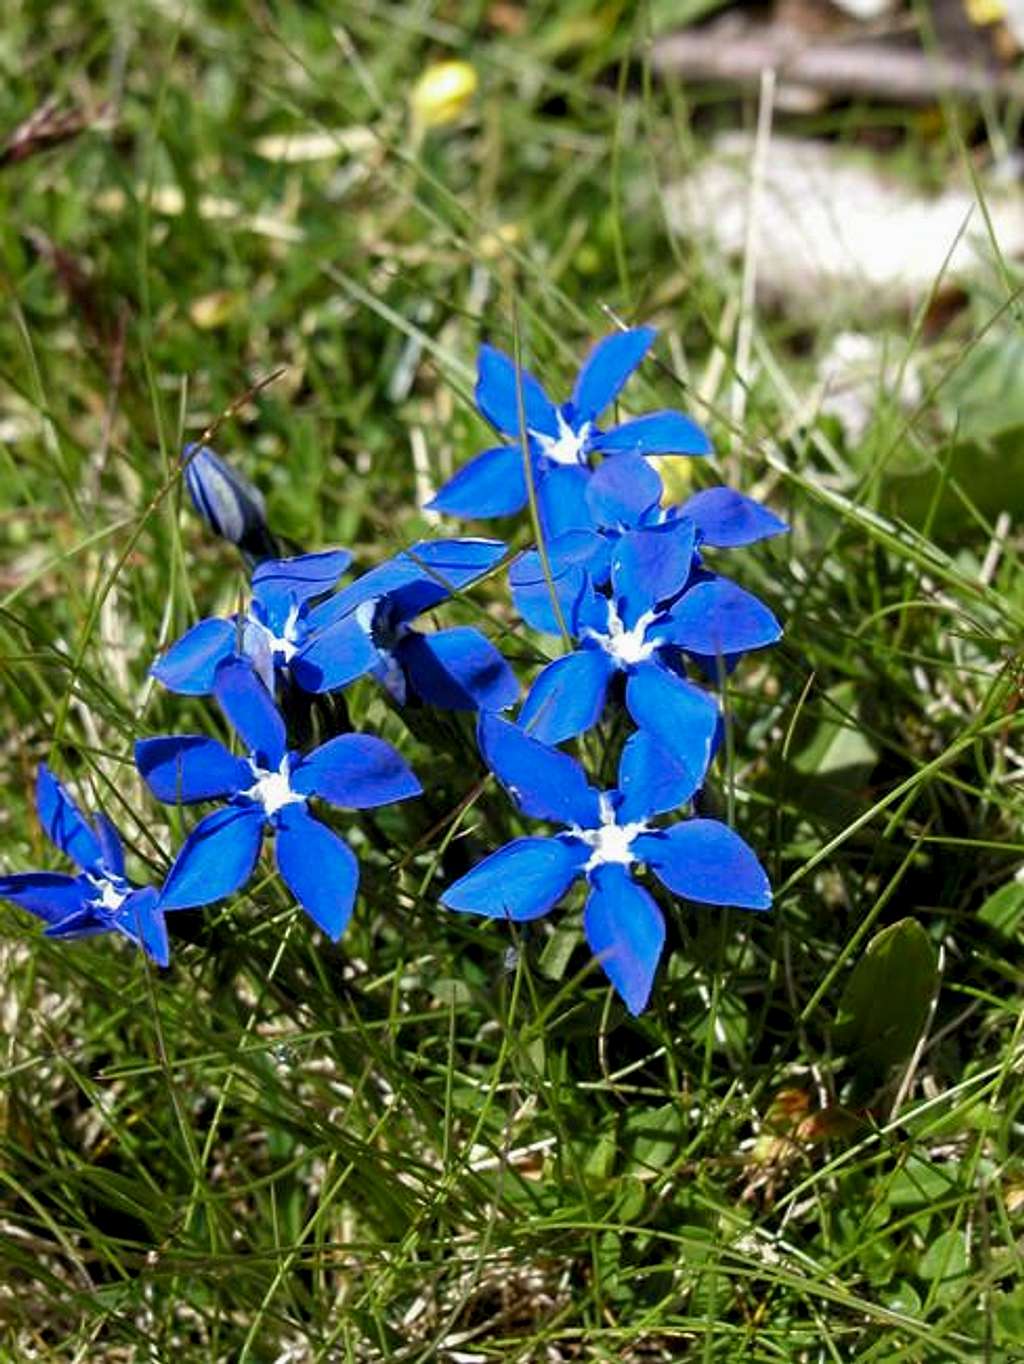 Gentiana flower on the foot...